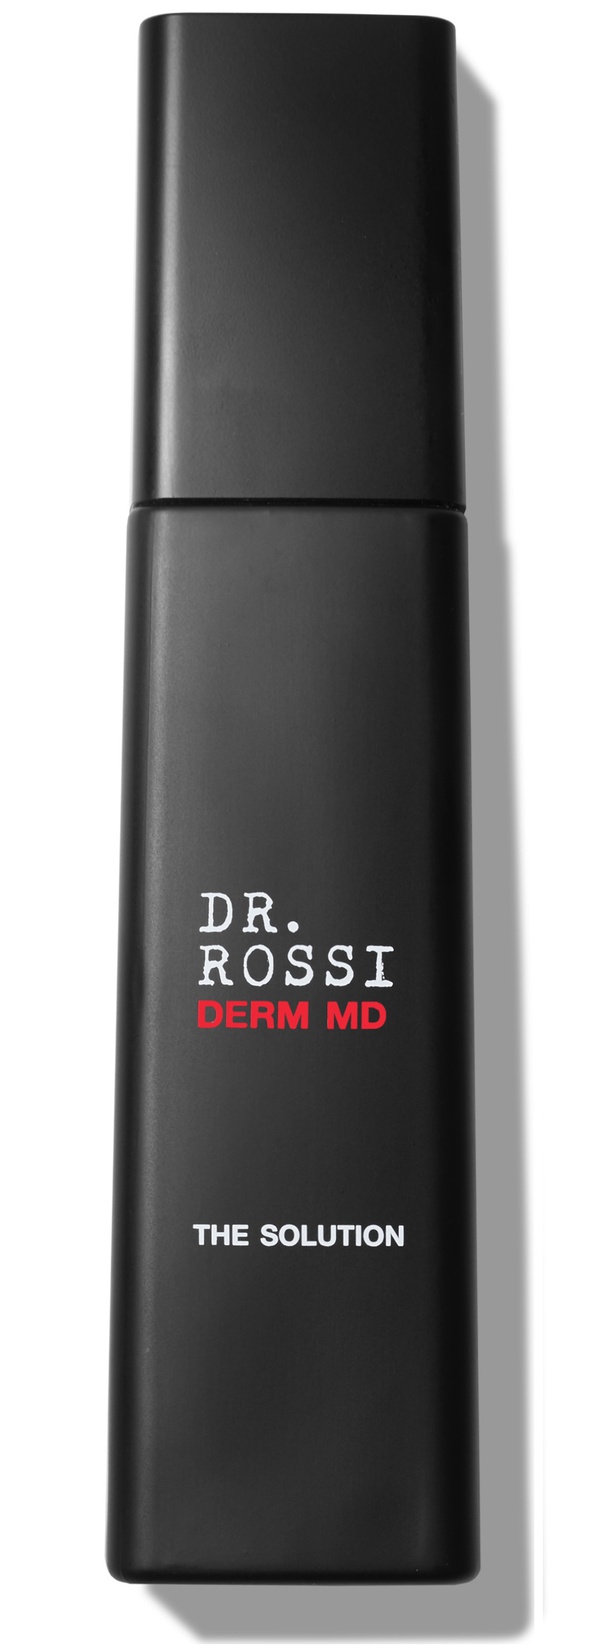 Dr. Rossi DERM MD The Solution